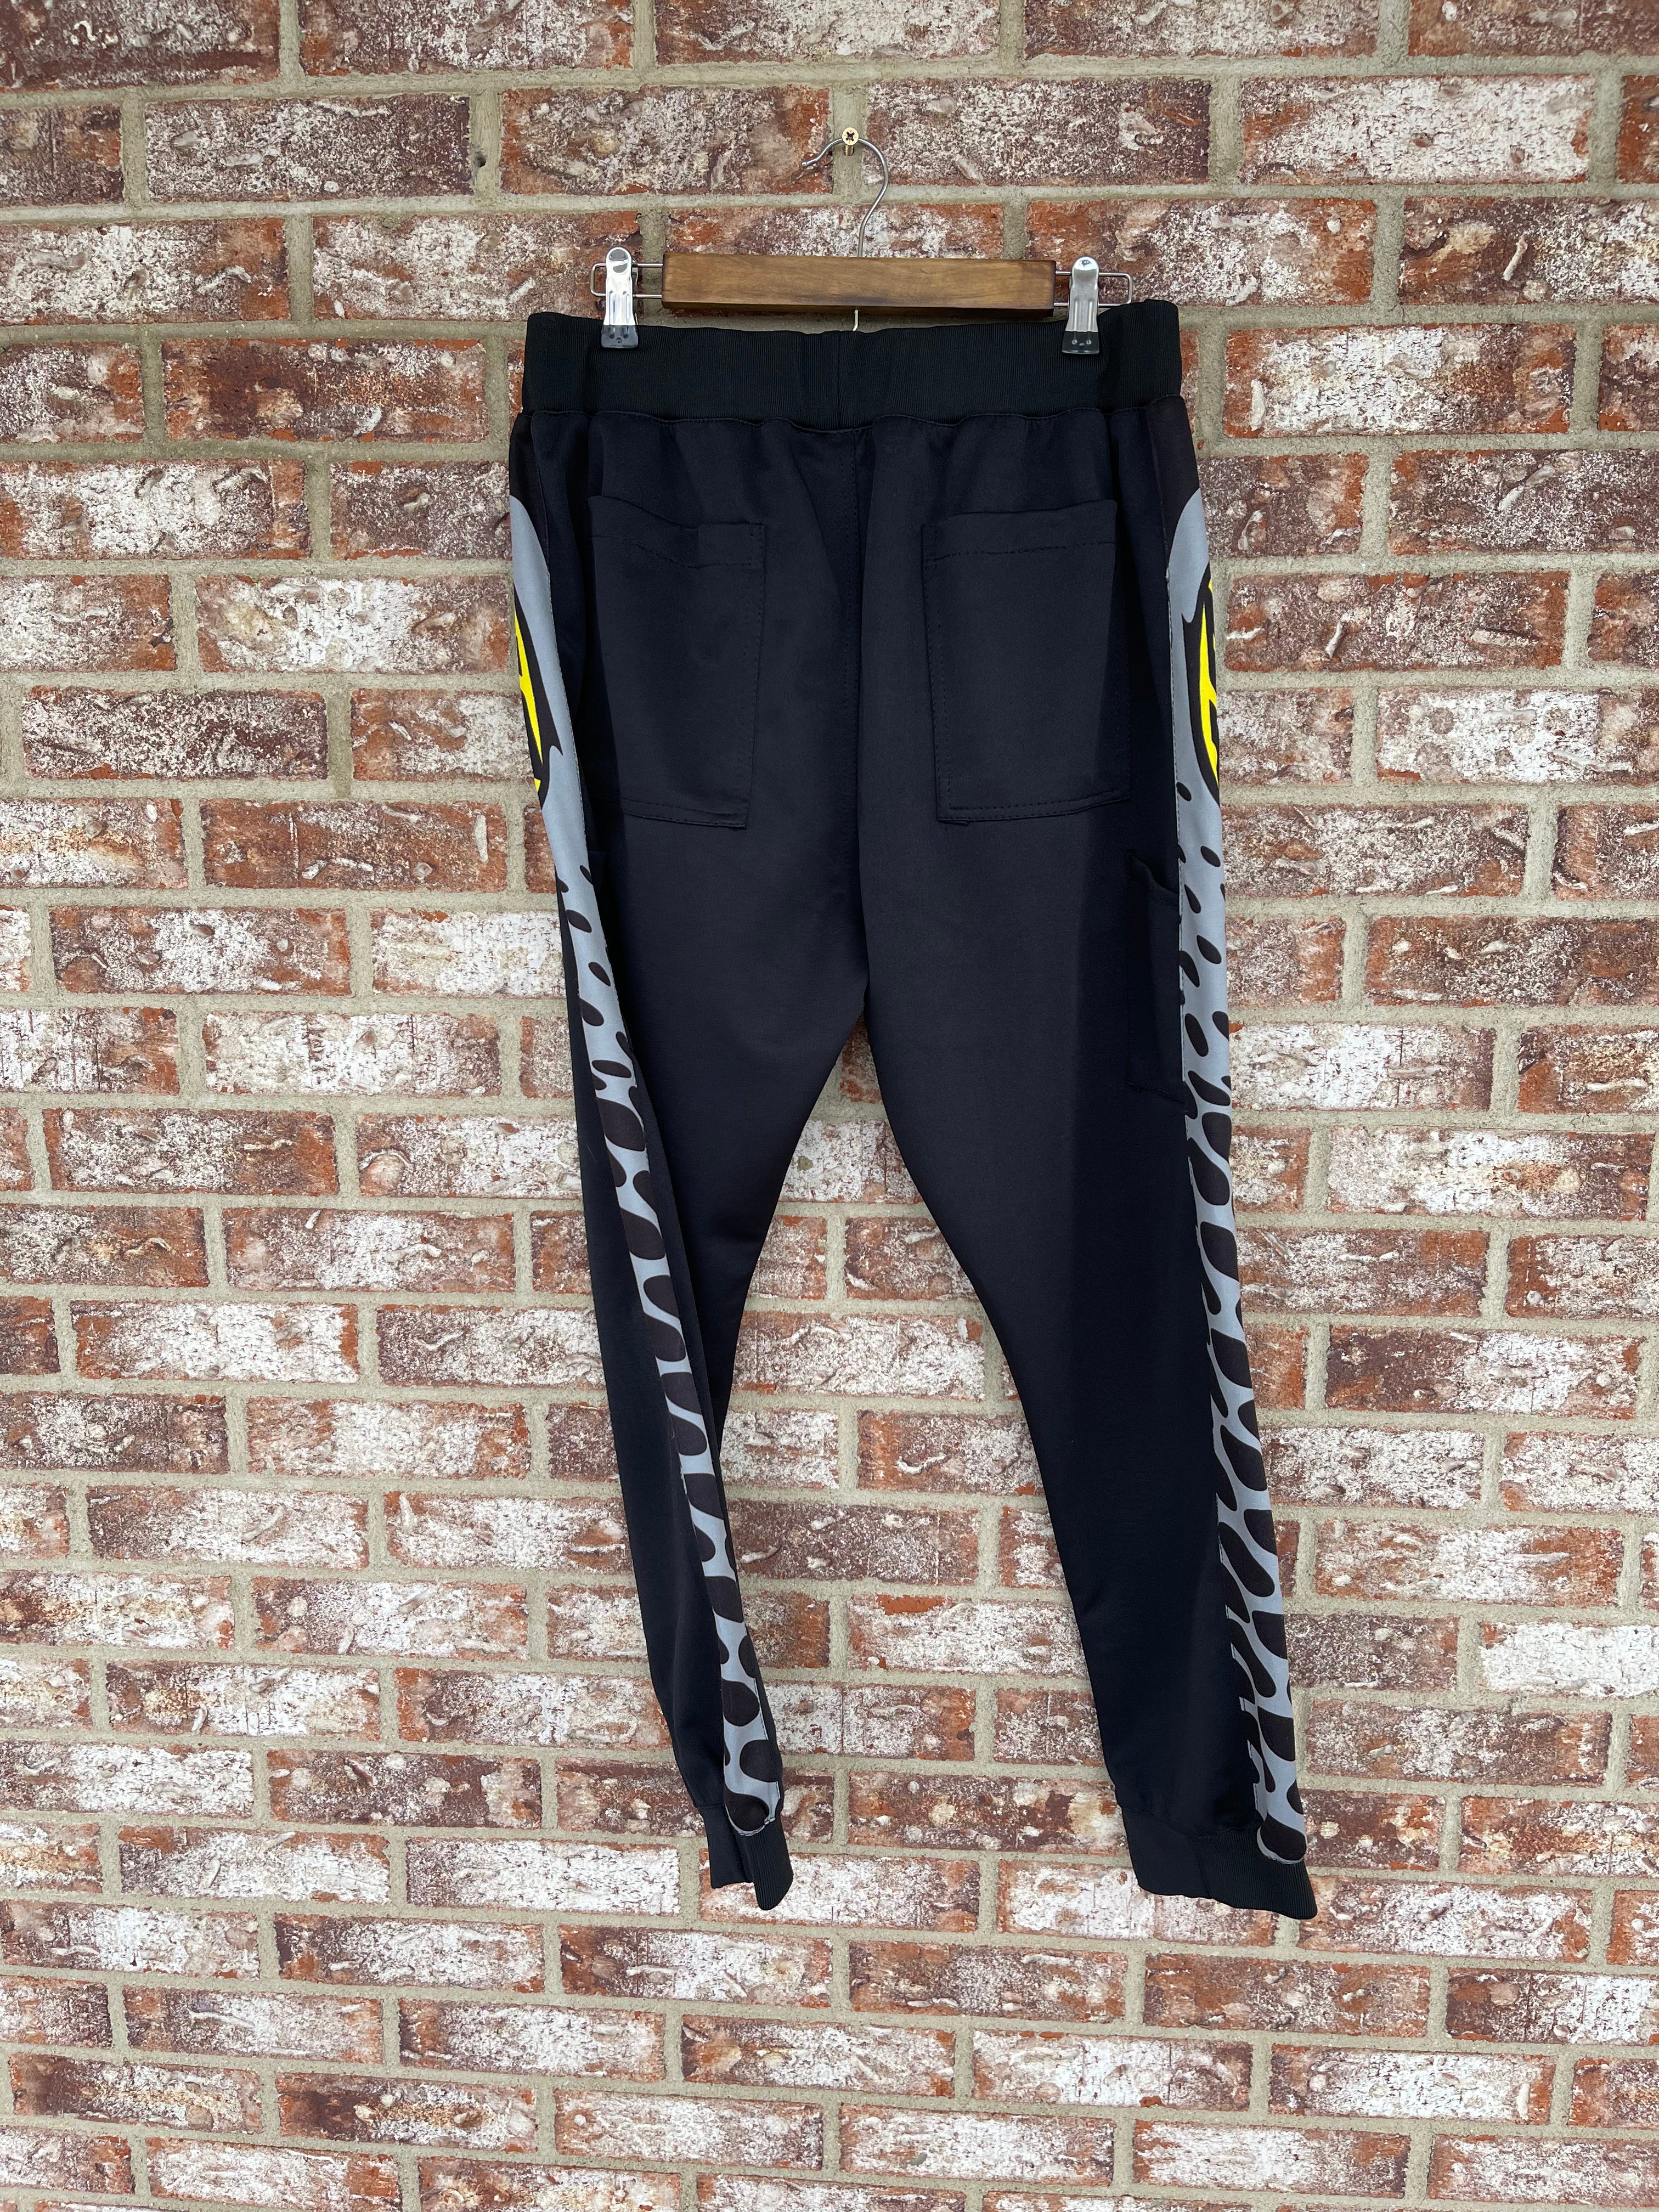 Used JT Jogger Paintball Pants- Black/Grey- Large